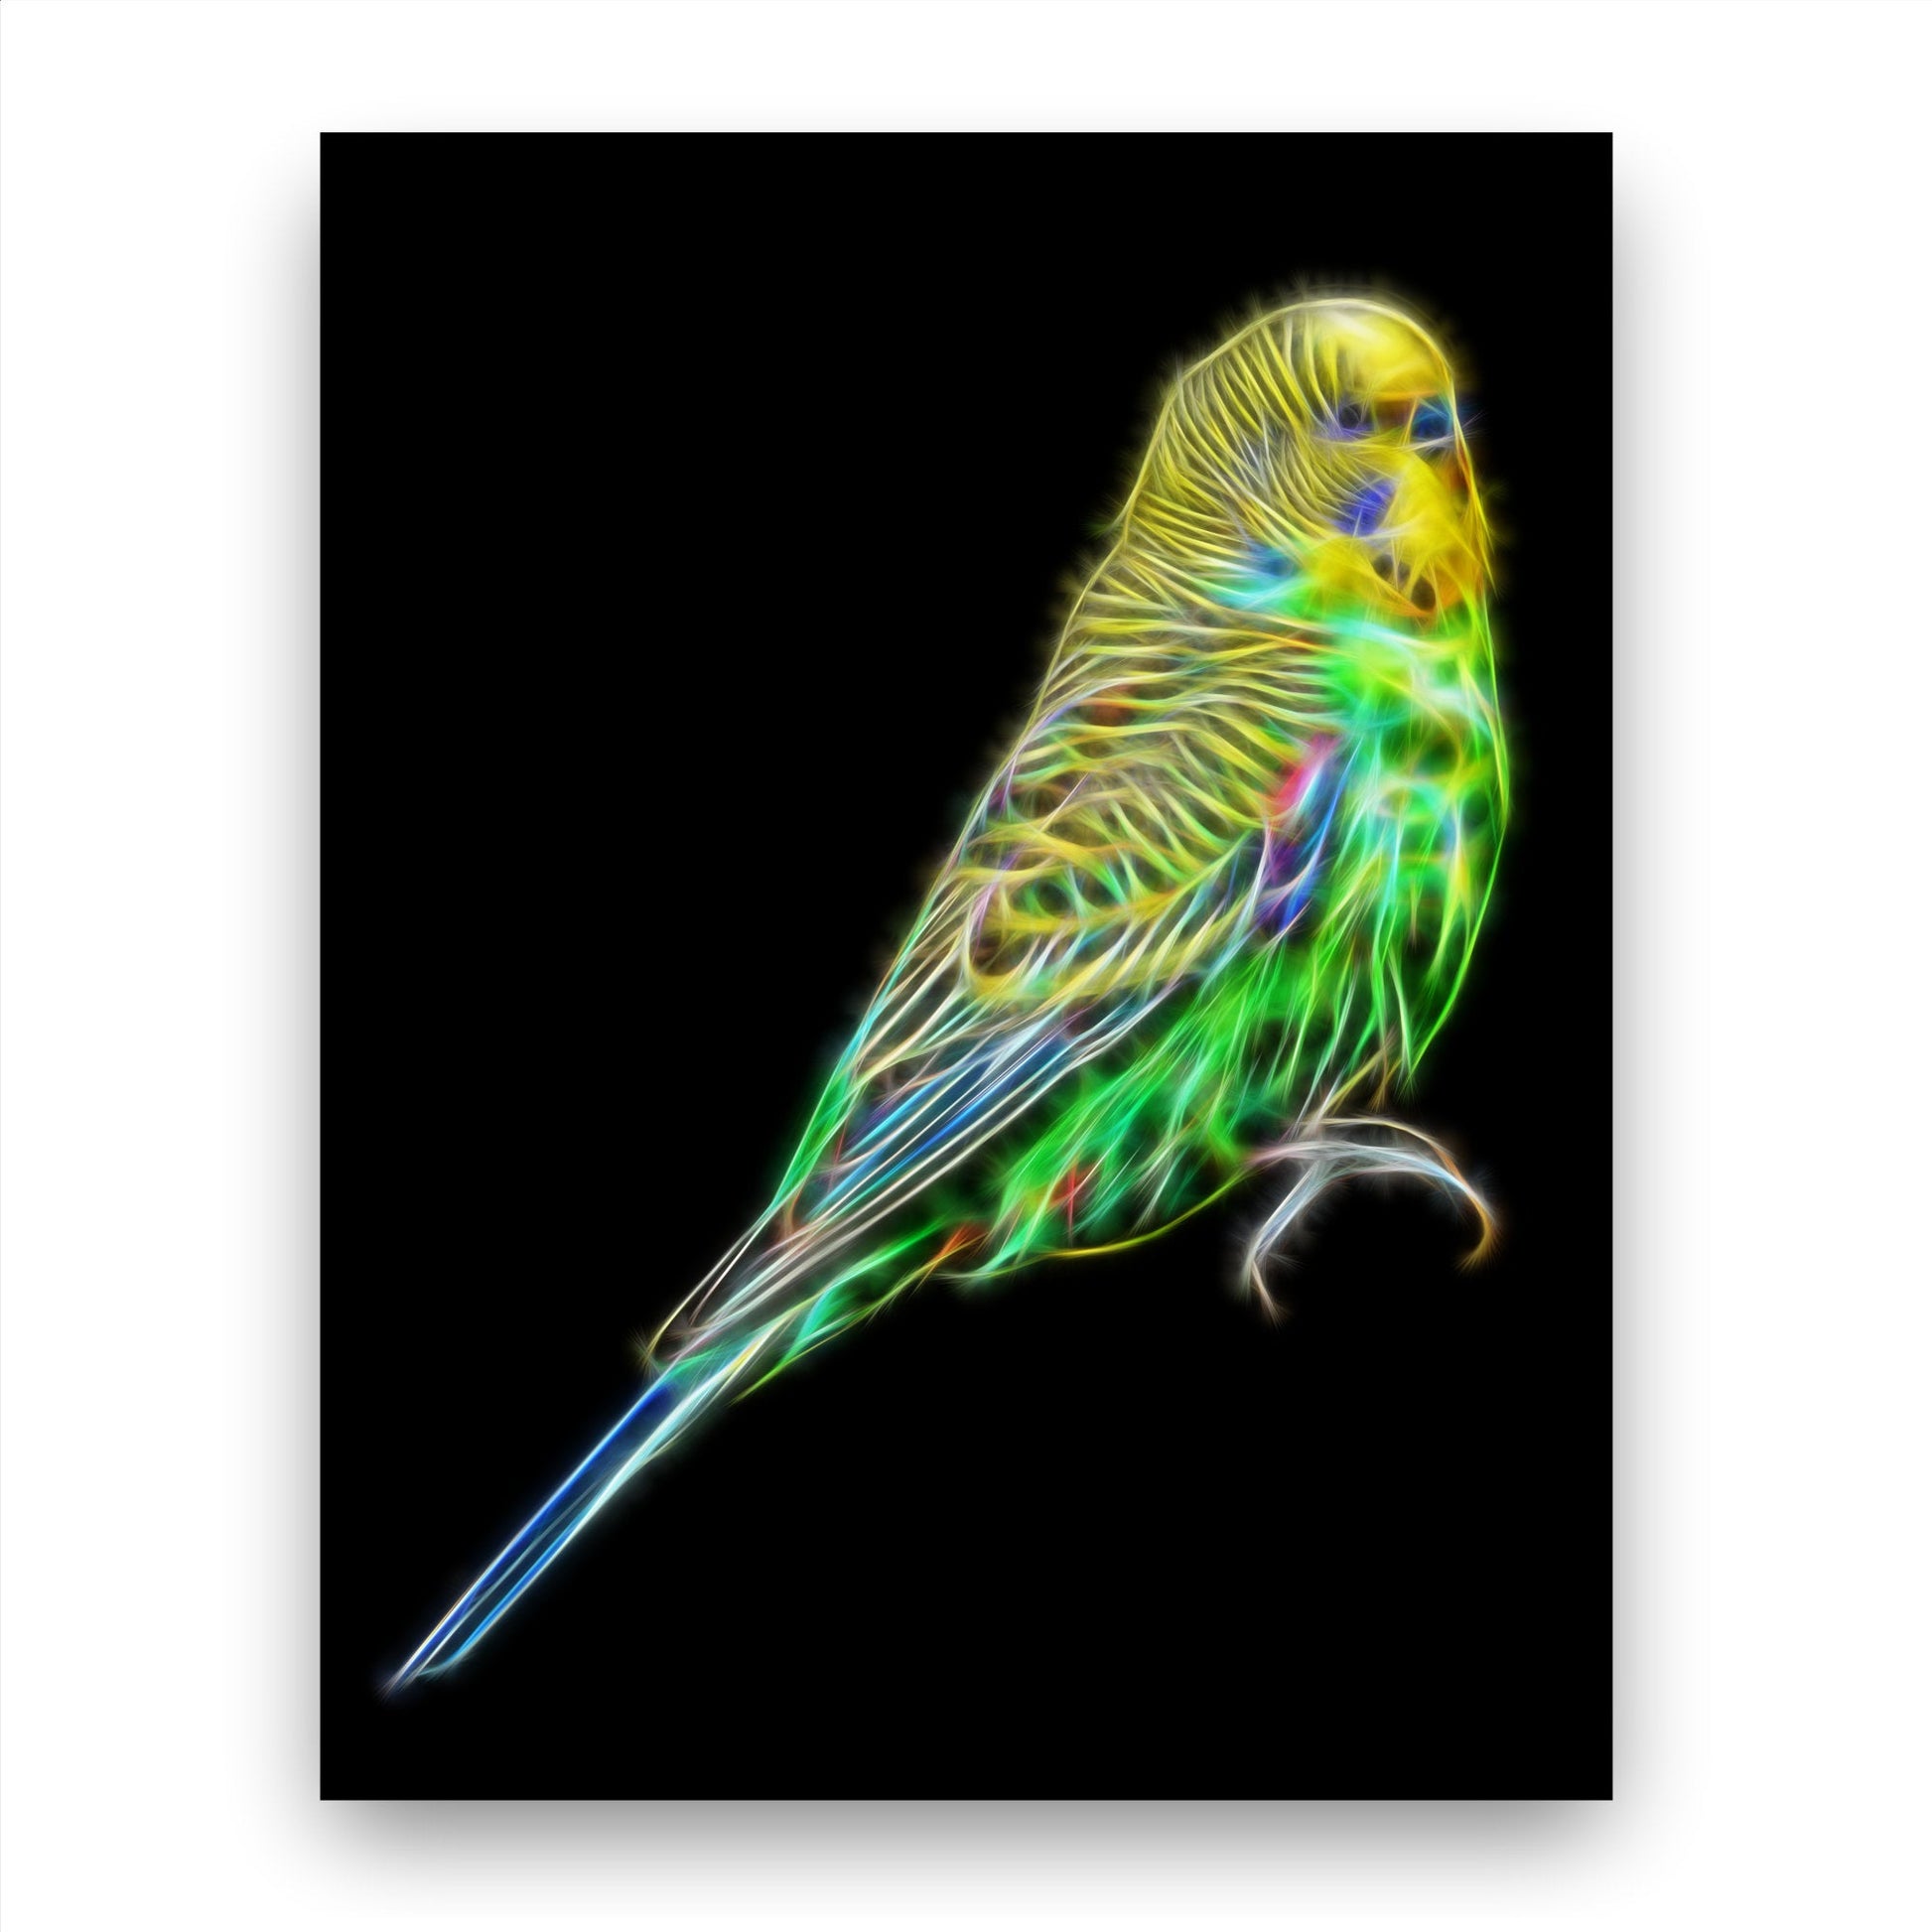 Budgie Print with Stunning Fractal Art Design. Blue or Green Budgerigar available.